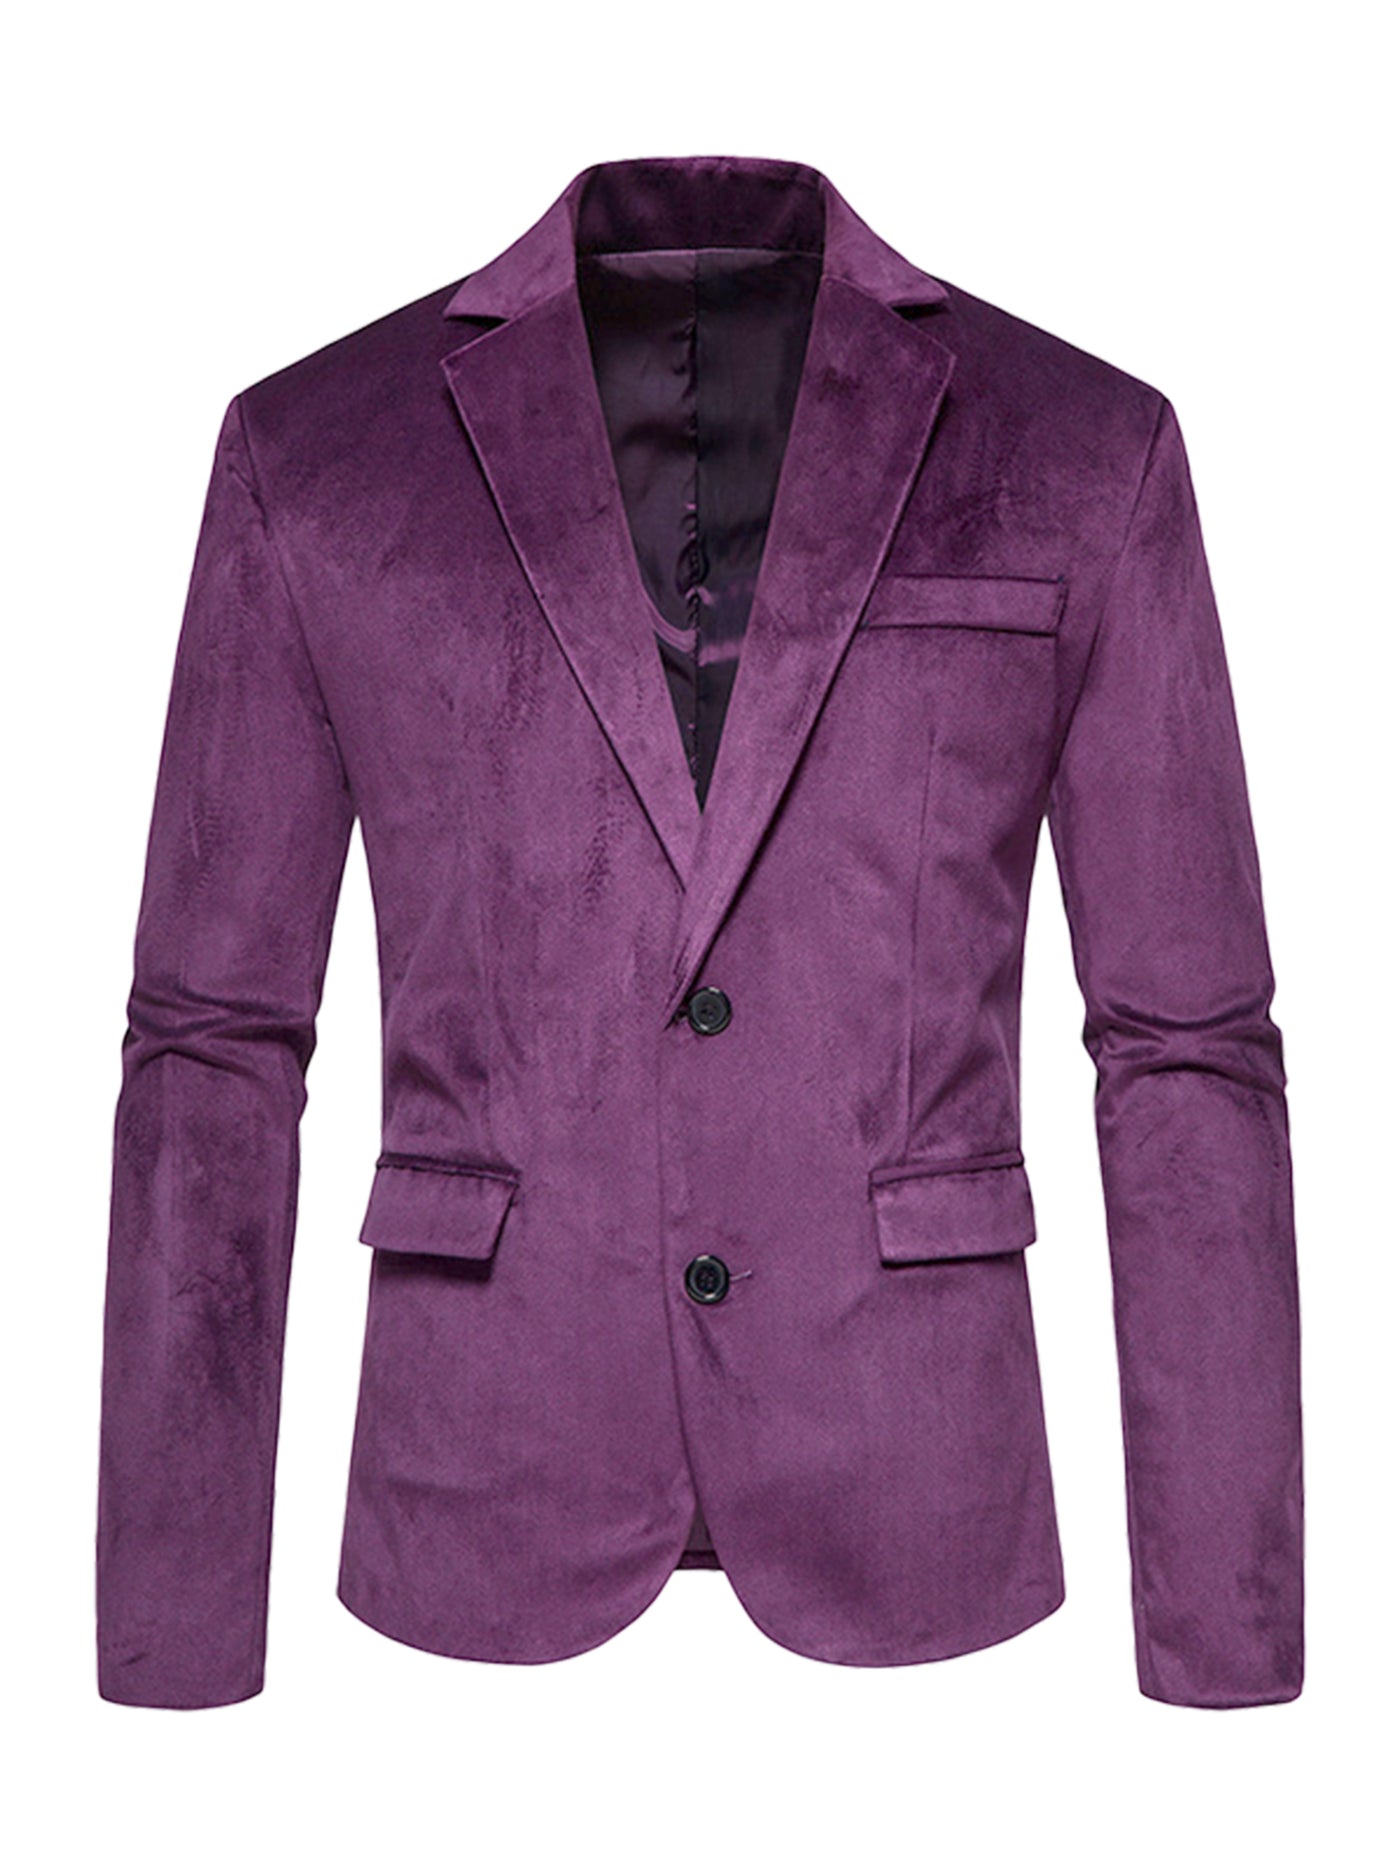 Bublédon Suede Blazers for Men's Slim Fit Solid Color Two Button Formal Sports Coats